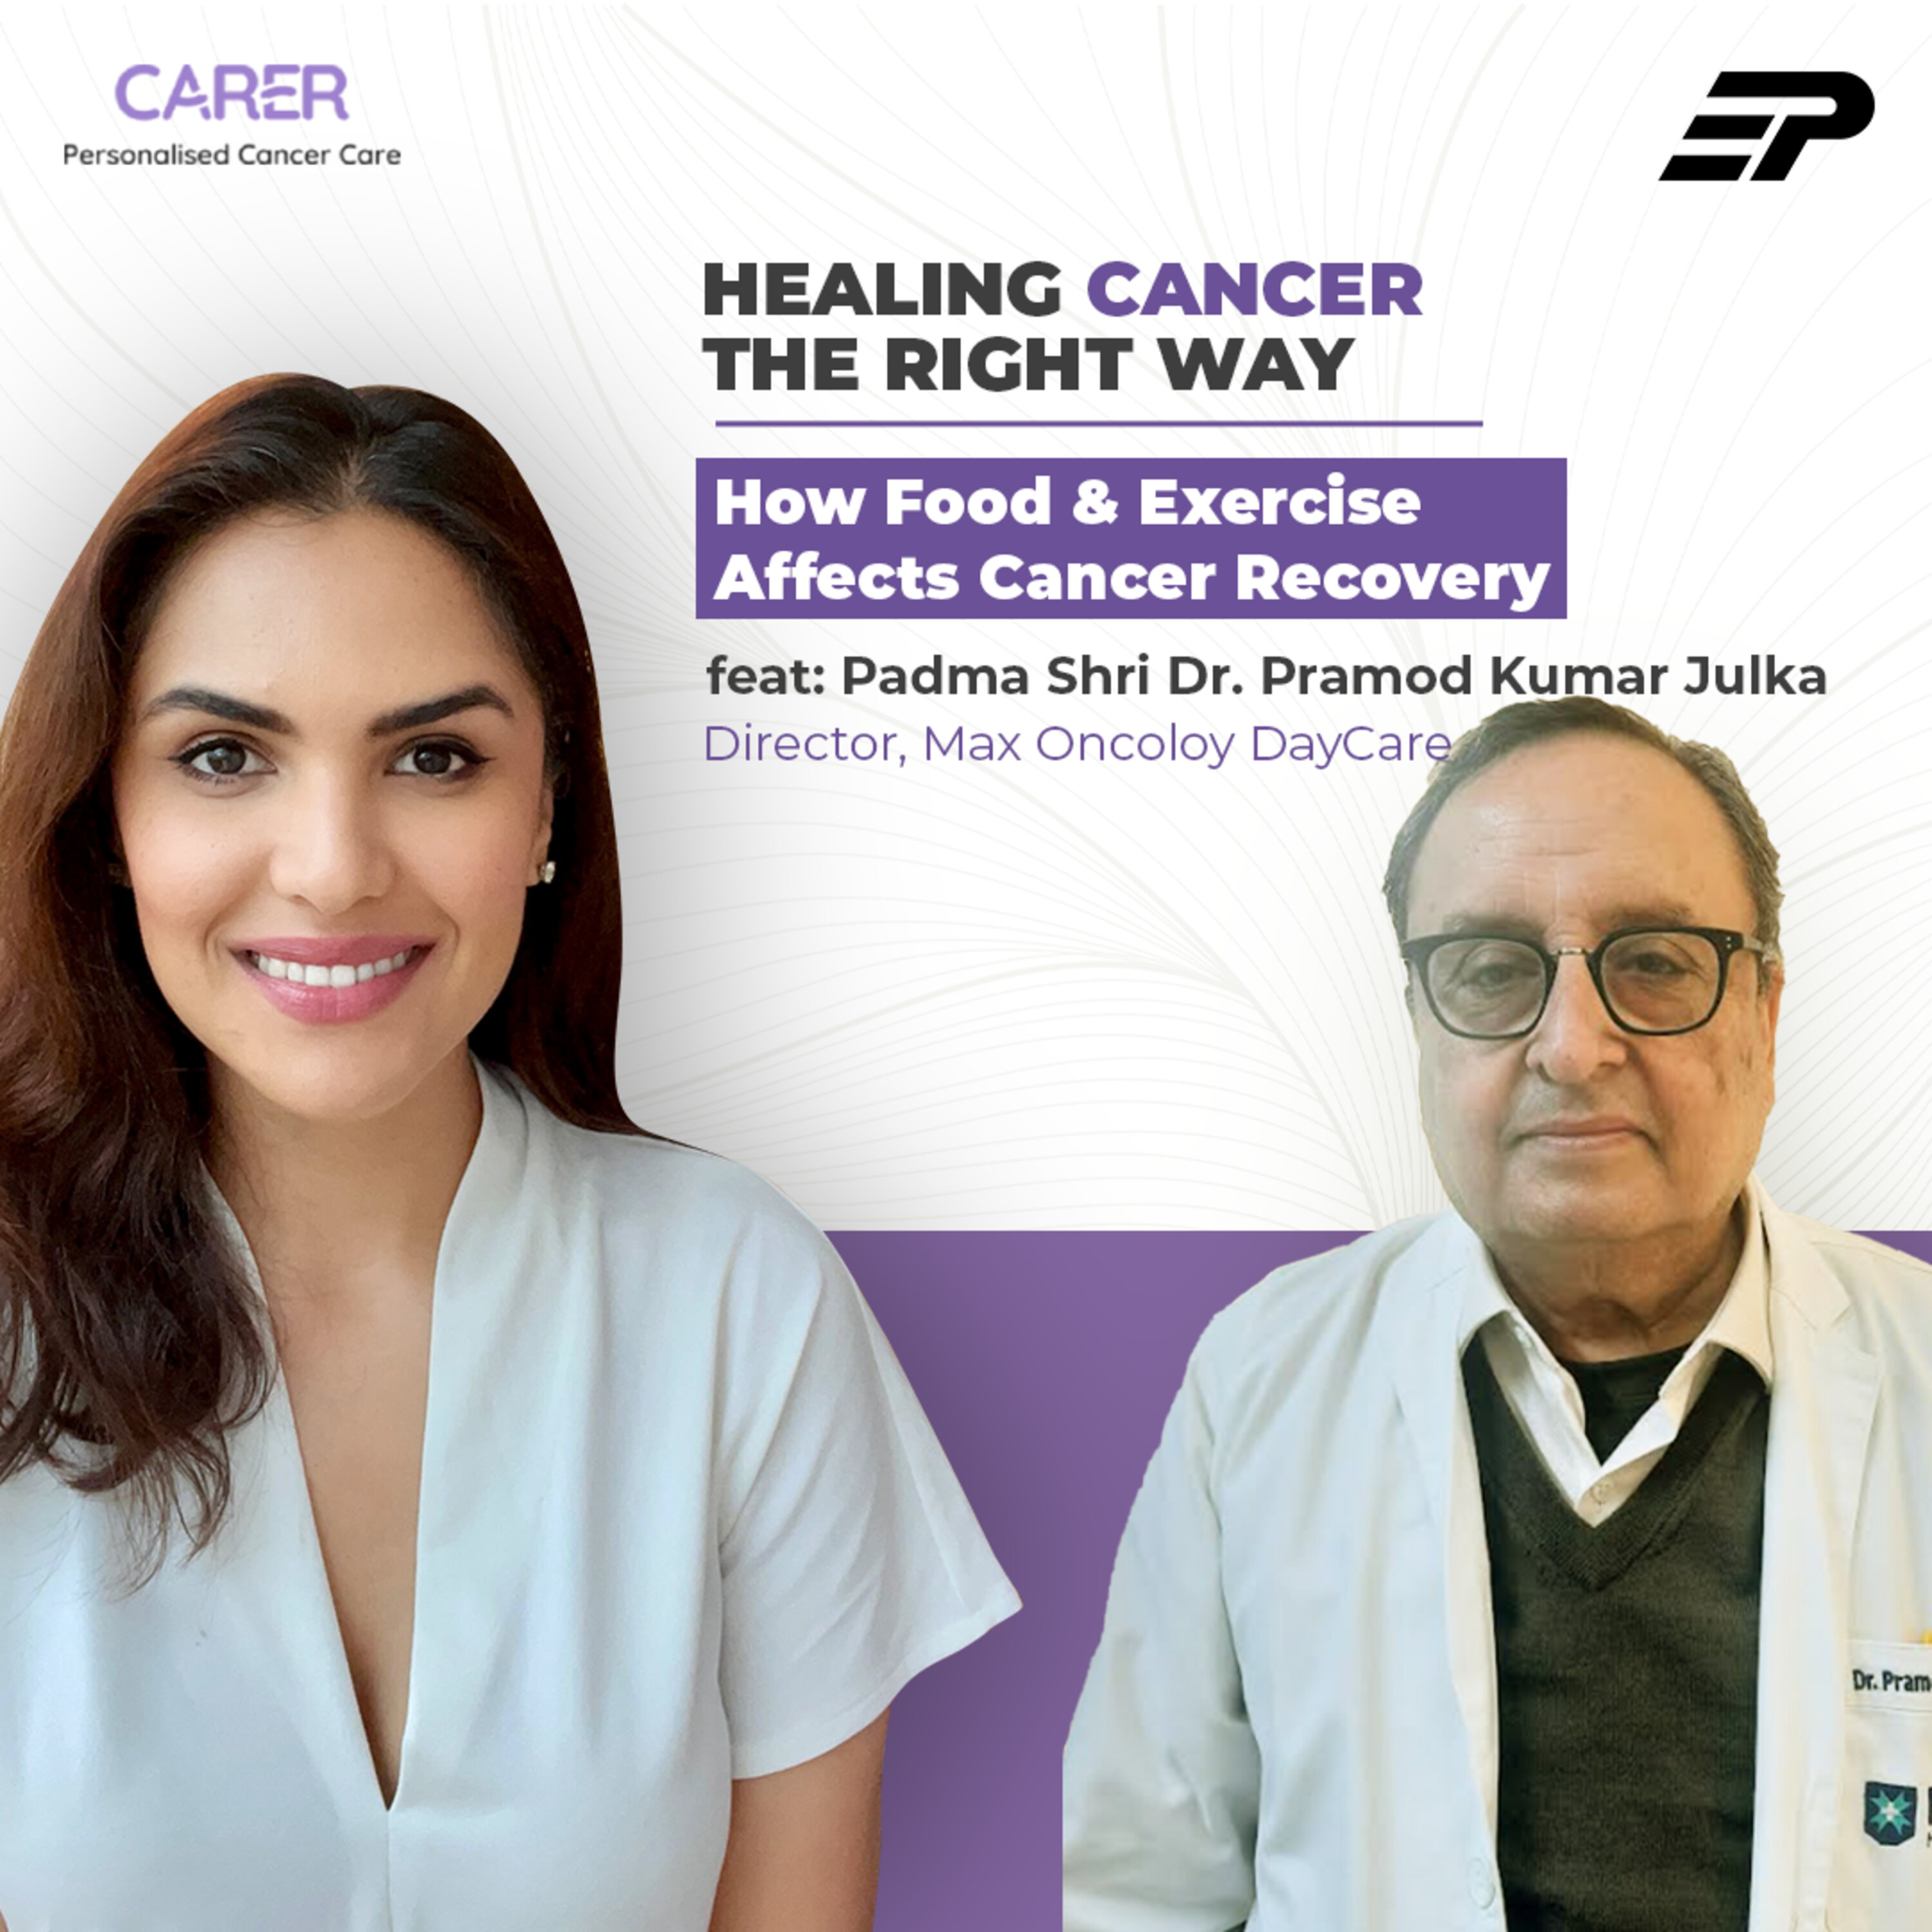 S1E6: How Food & Exercise Affects Cancer Recovery feat: Padma Shri Dr. Pramod Kumar Julka